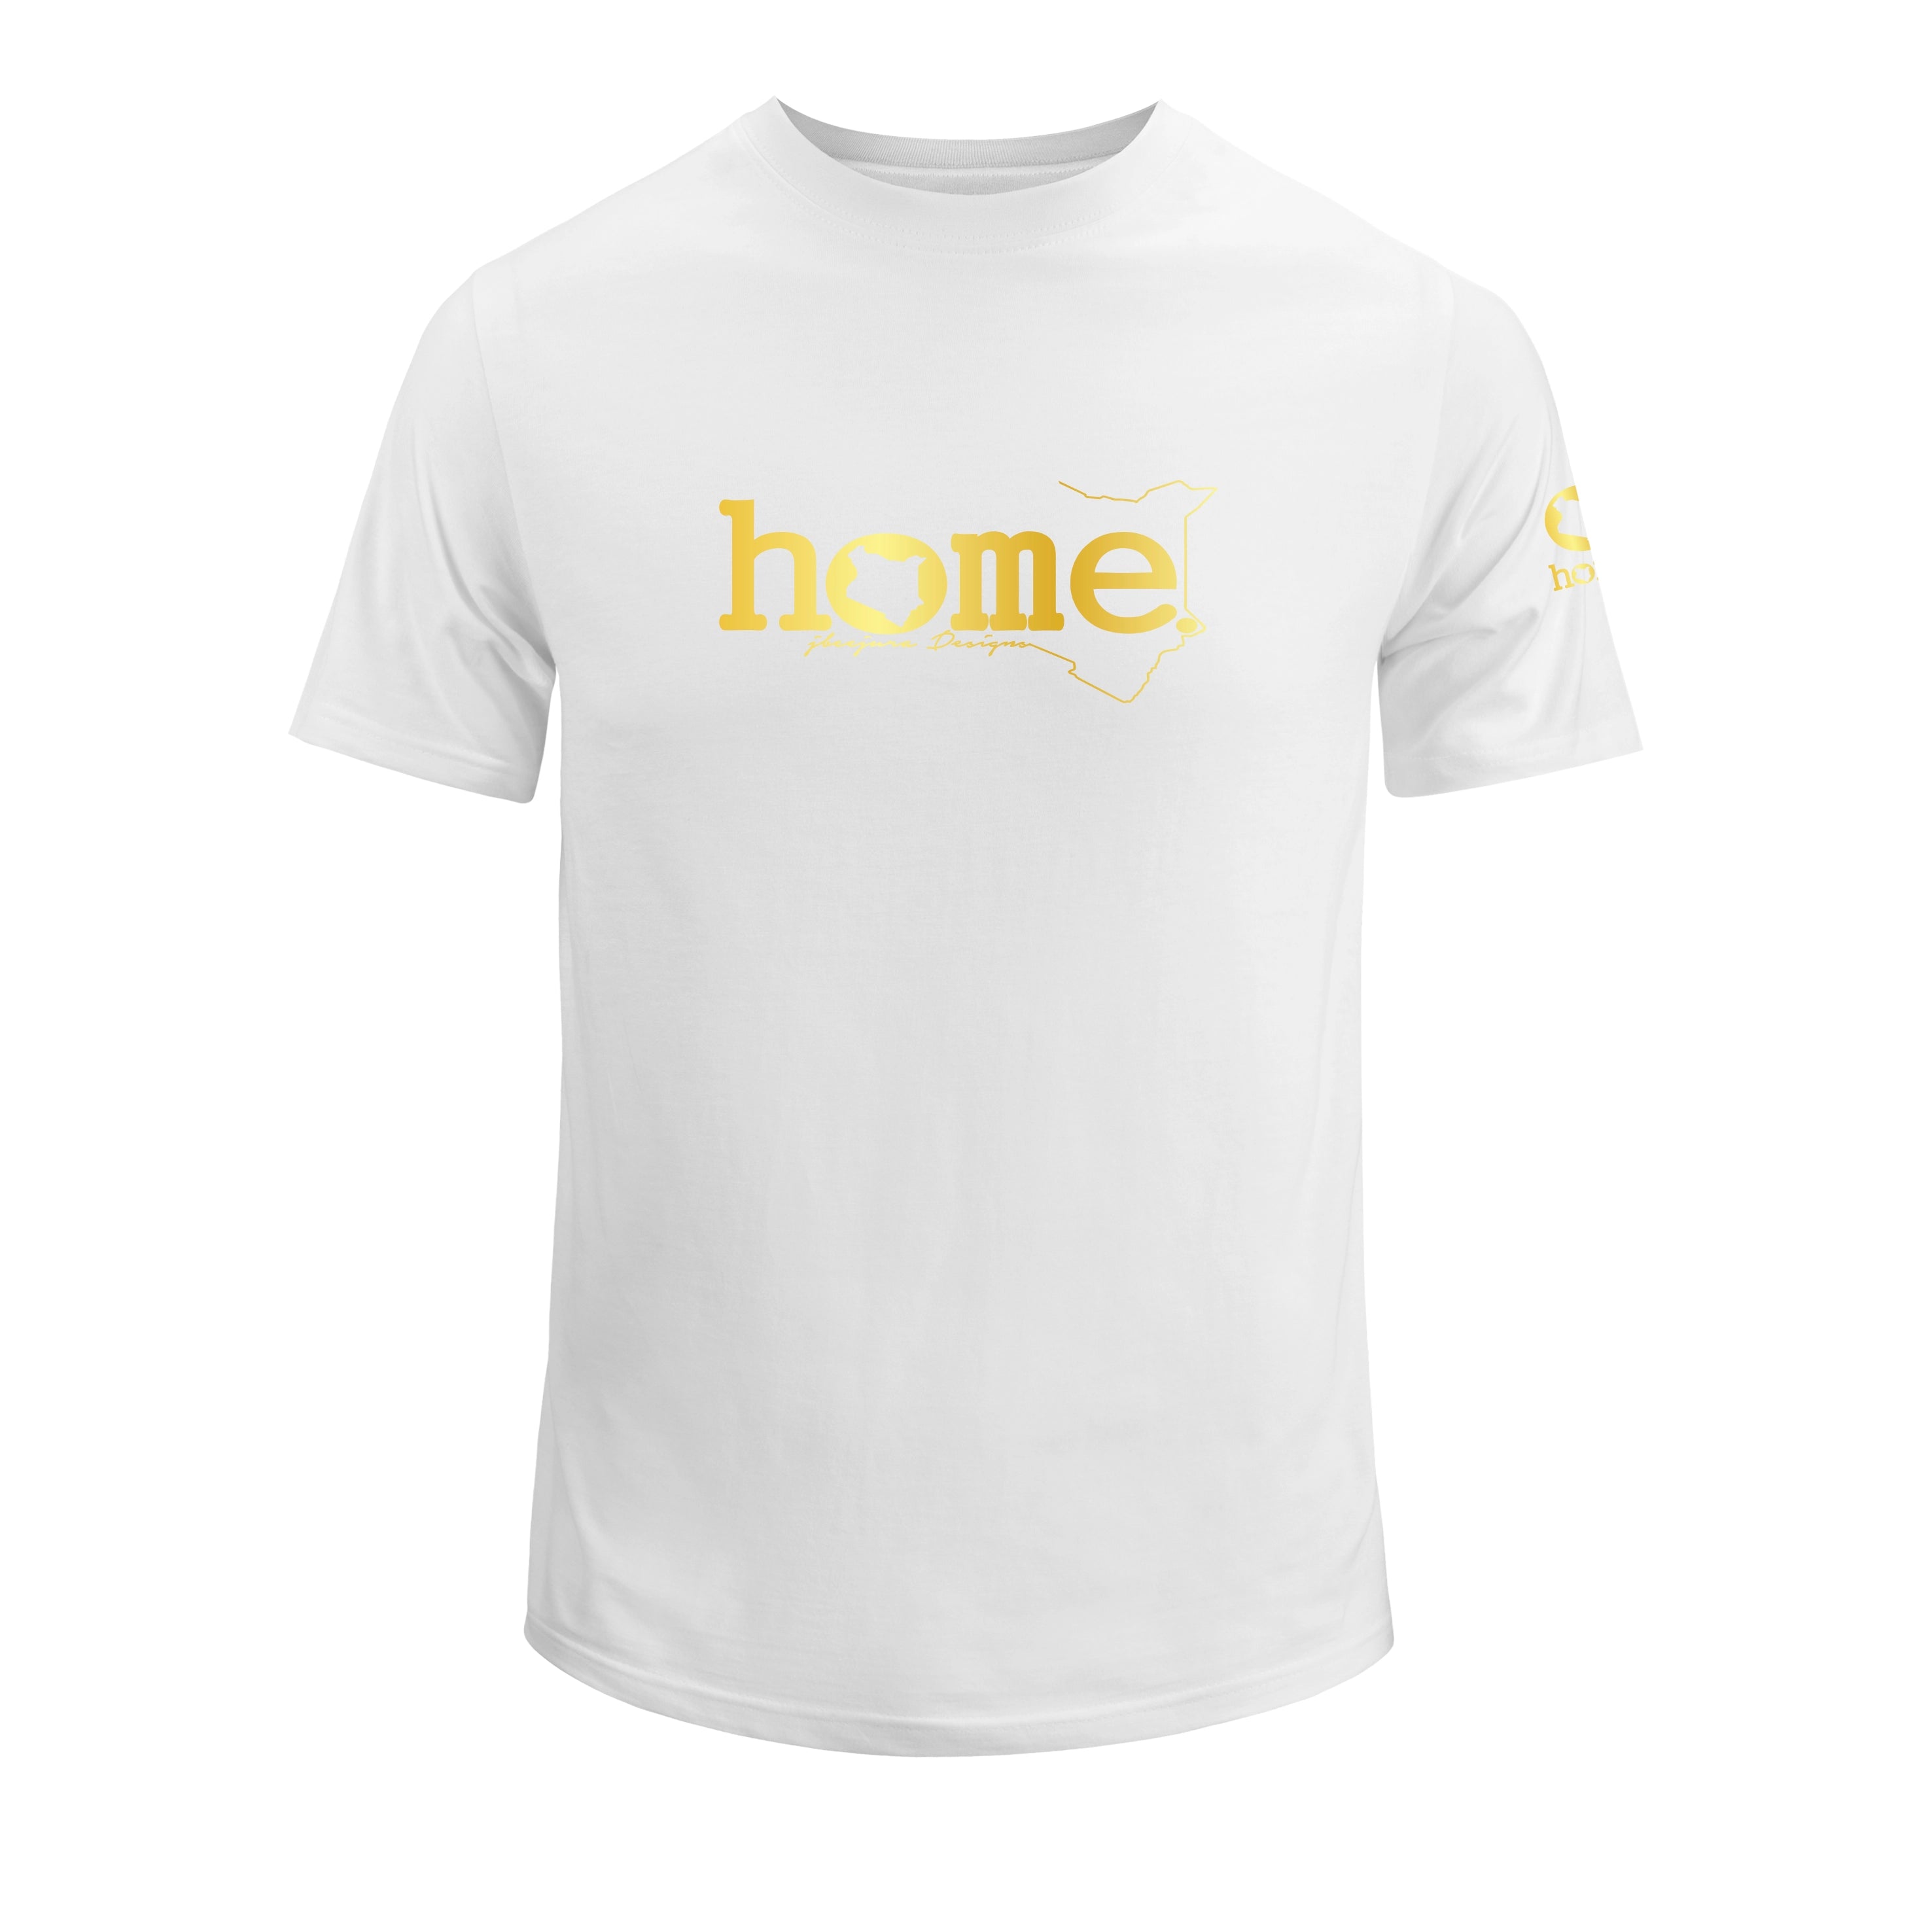 home_254 SHORT-SLEEVED WHITE T-SHIRT WITH A GOLD CLASSIC WORDS PRINT – COTTON PLUS FABRIC